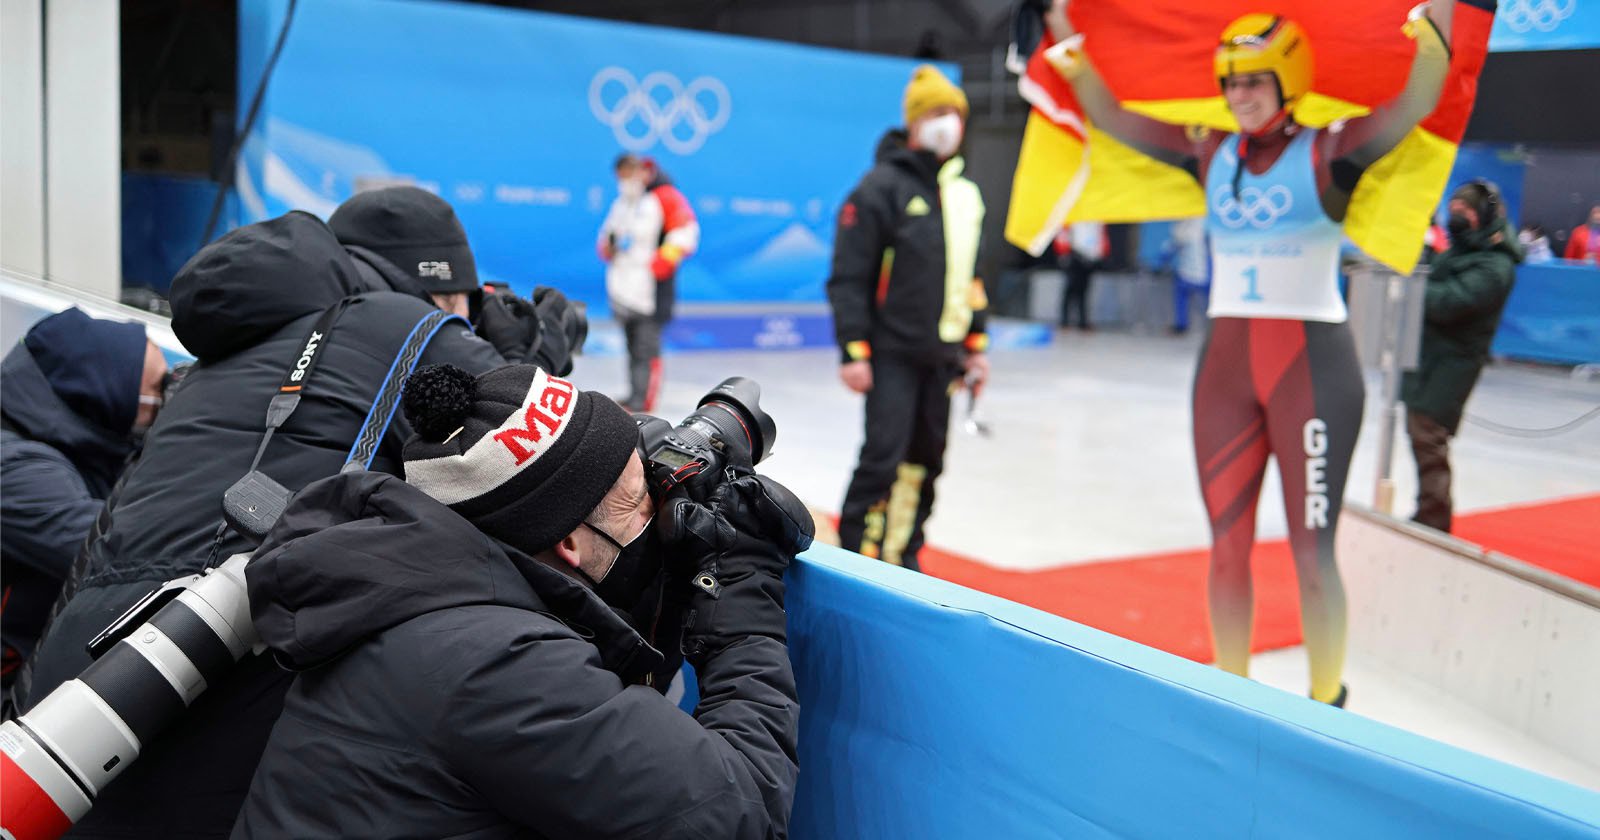 Getty Details its Remote 2022 Winter Olympics Photo Editing System